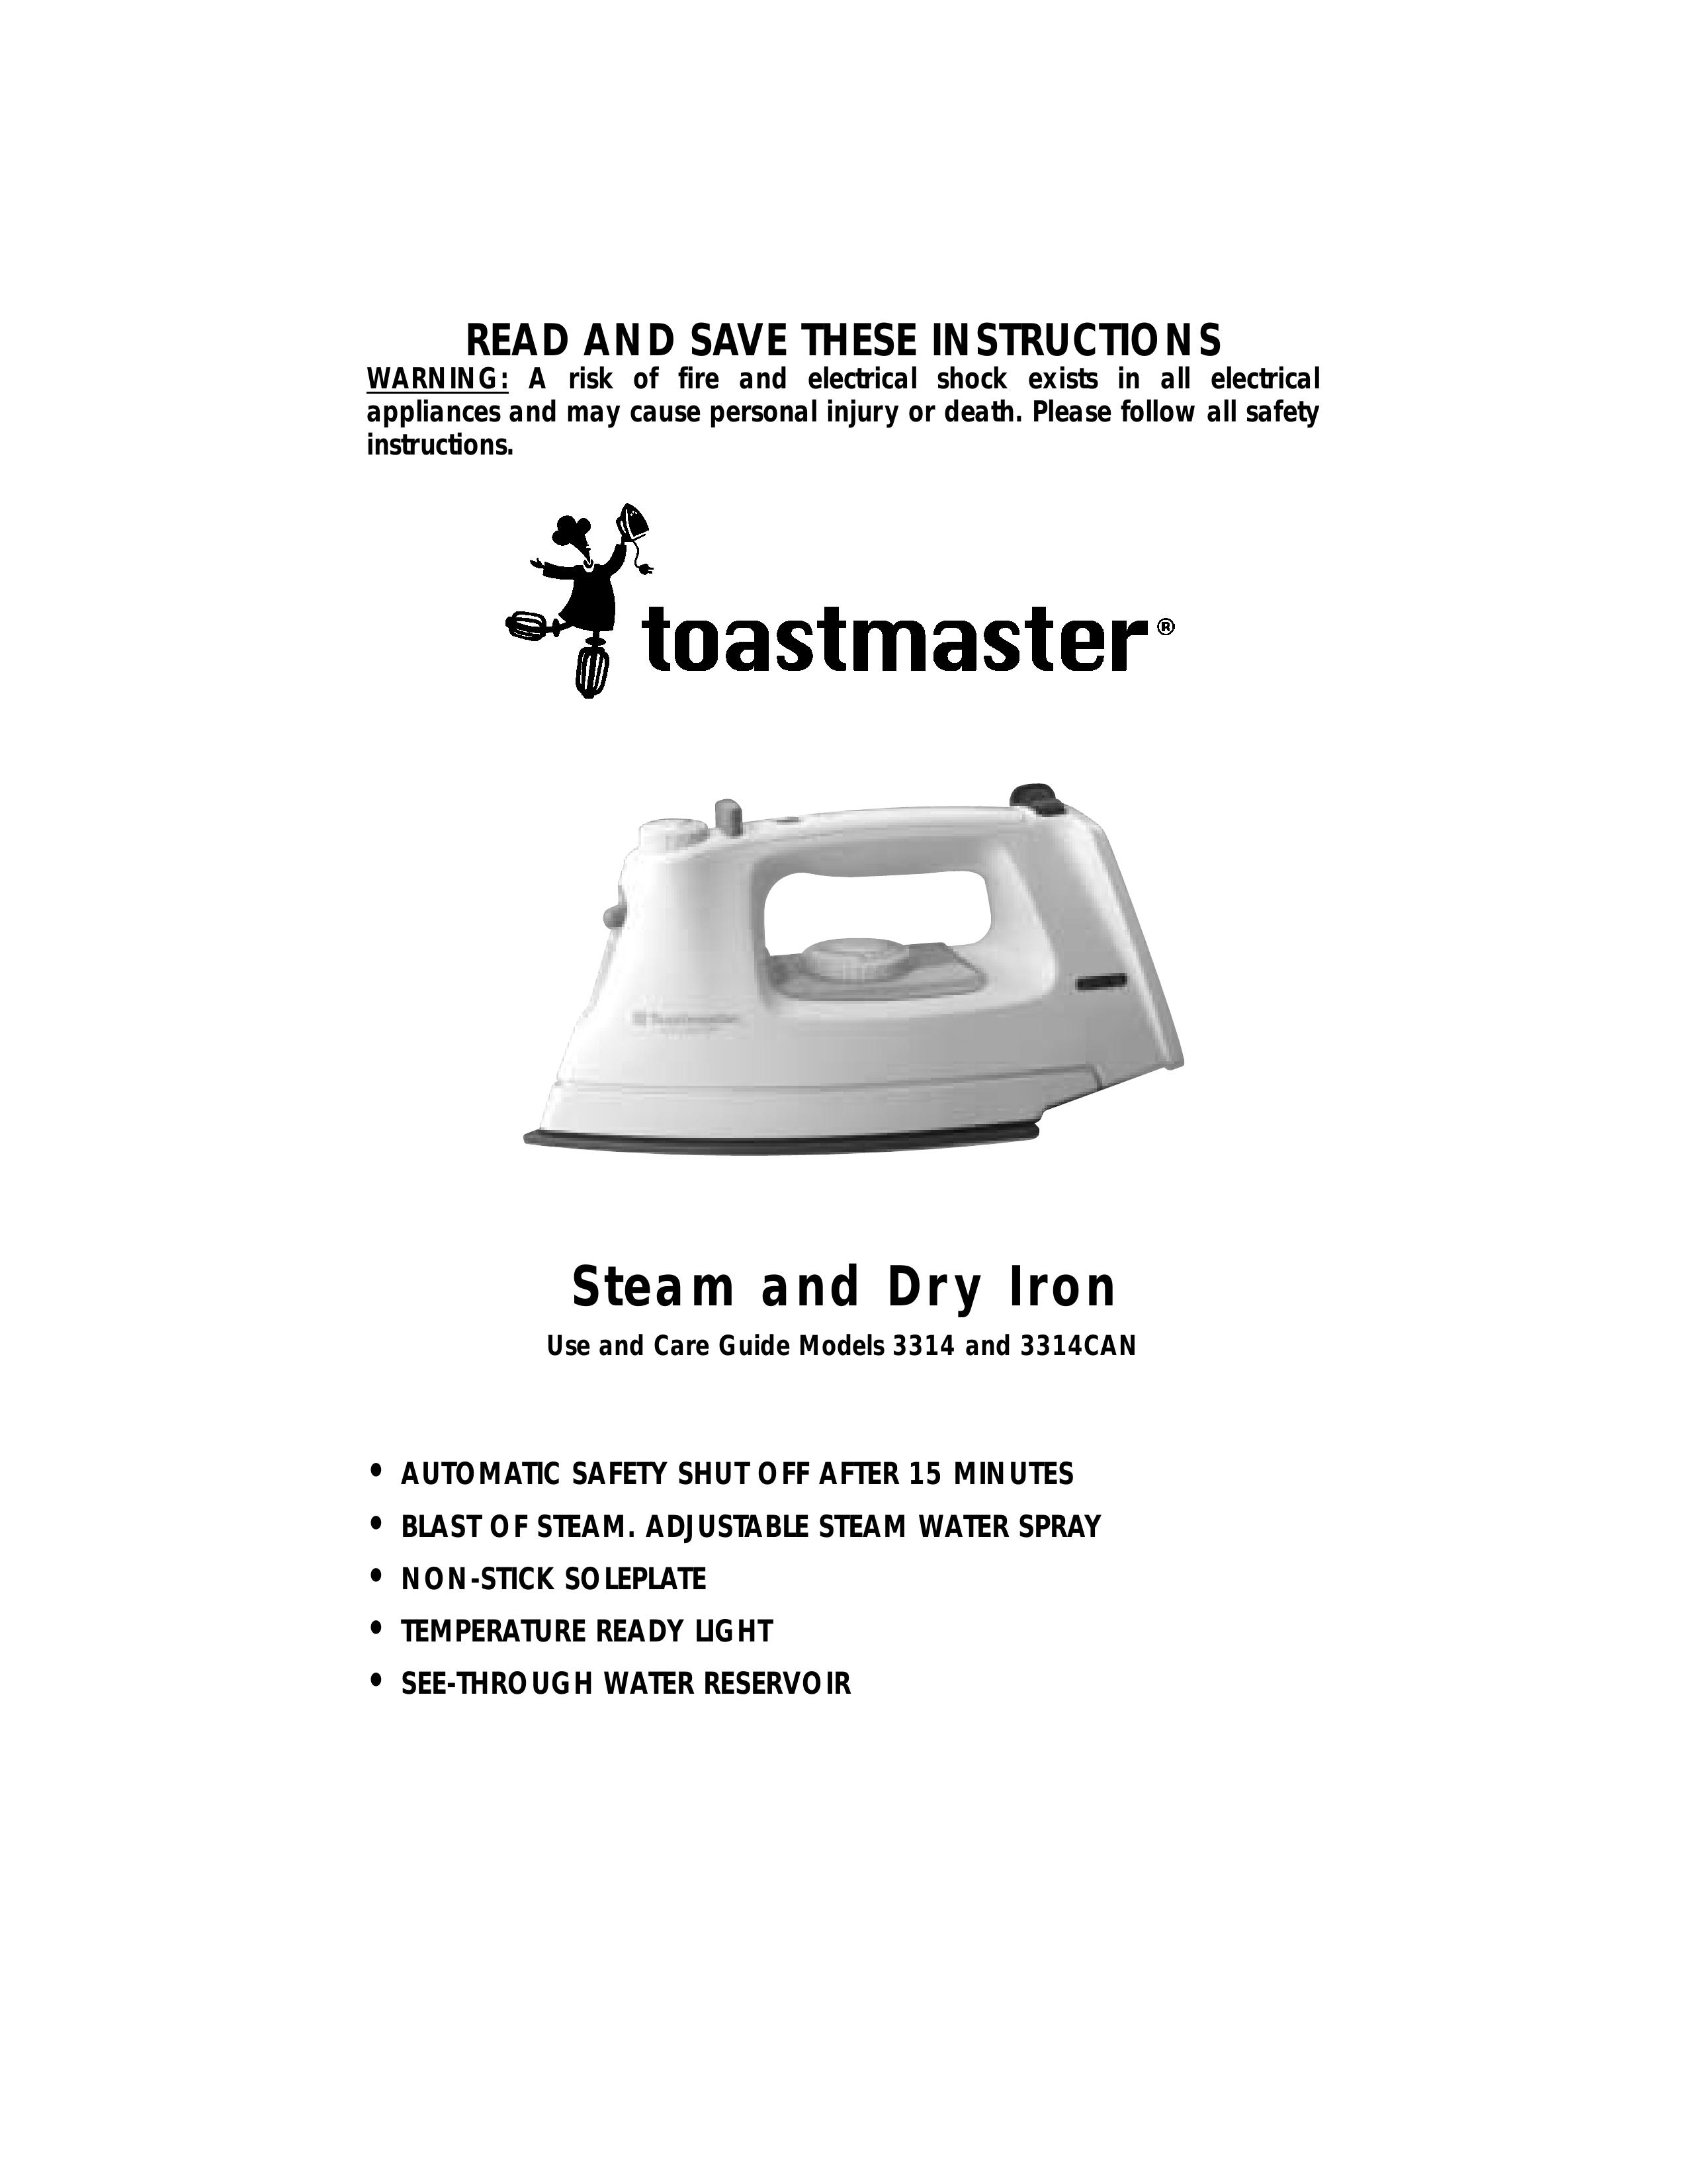 Toastmaster 3314CAN Iron User Manual